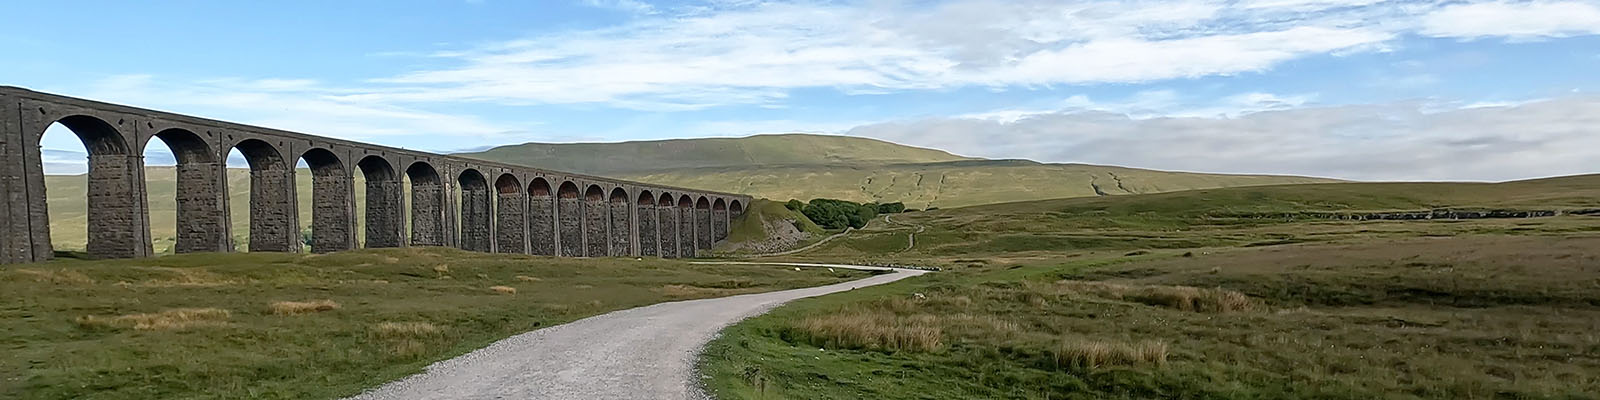 Whernside from the Ribblehead Viaduct